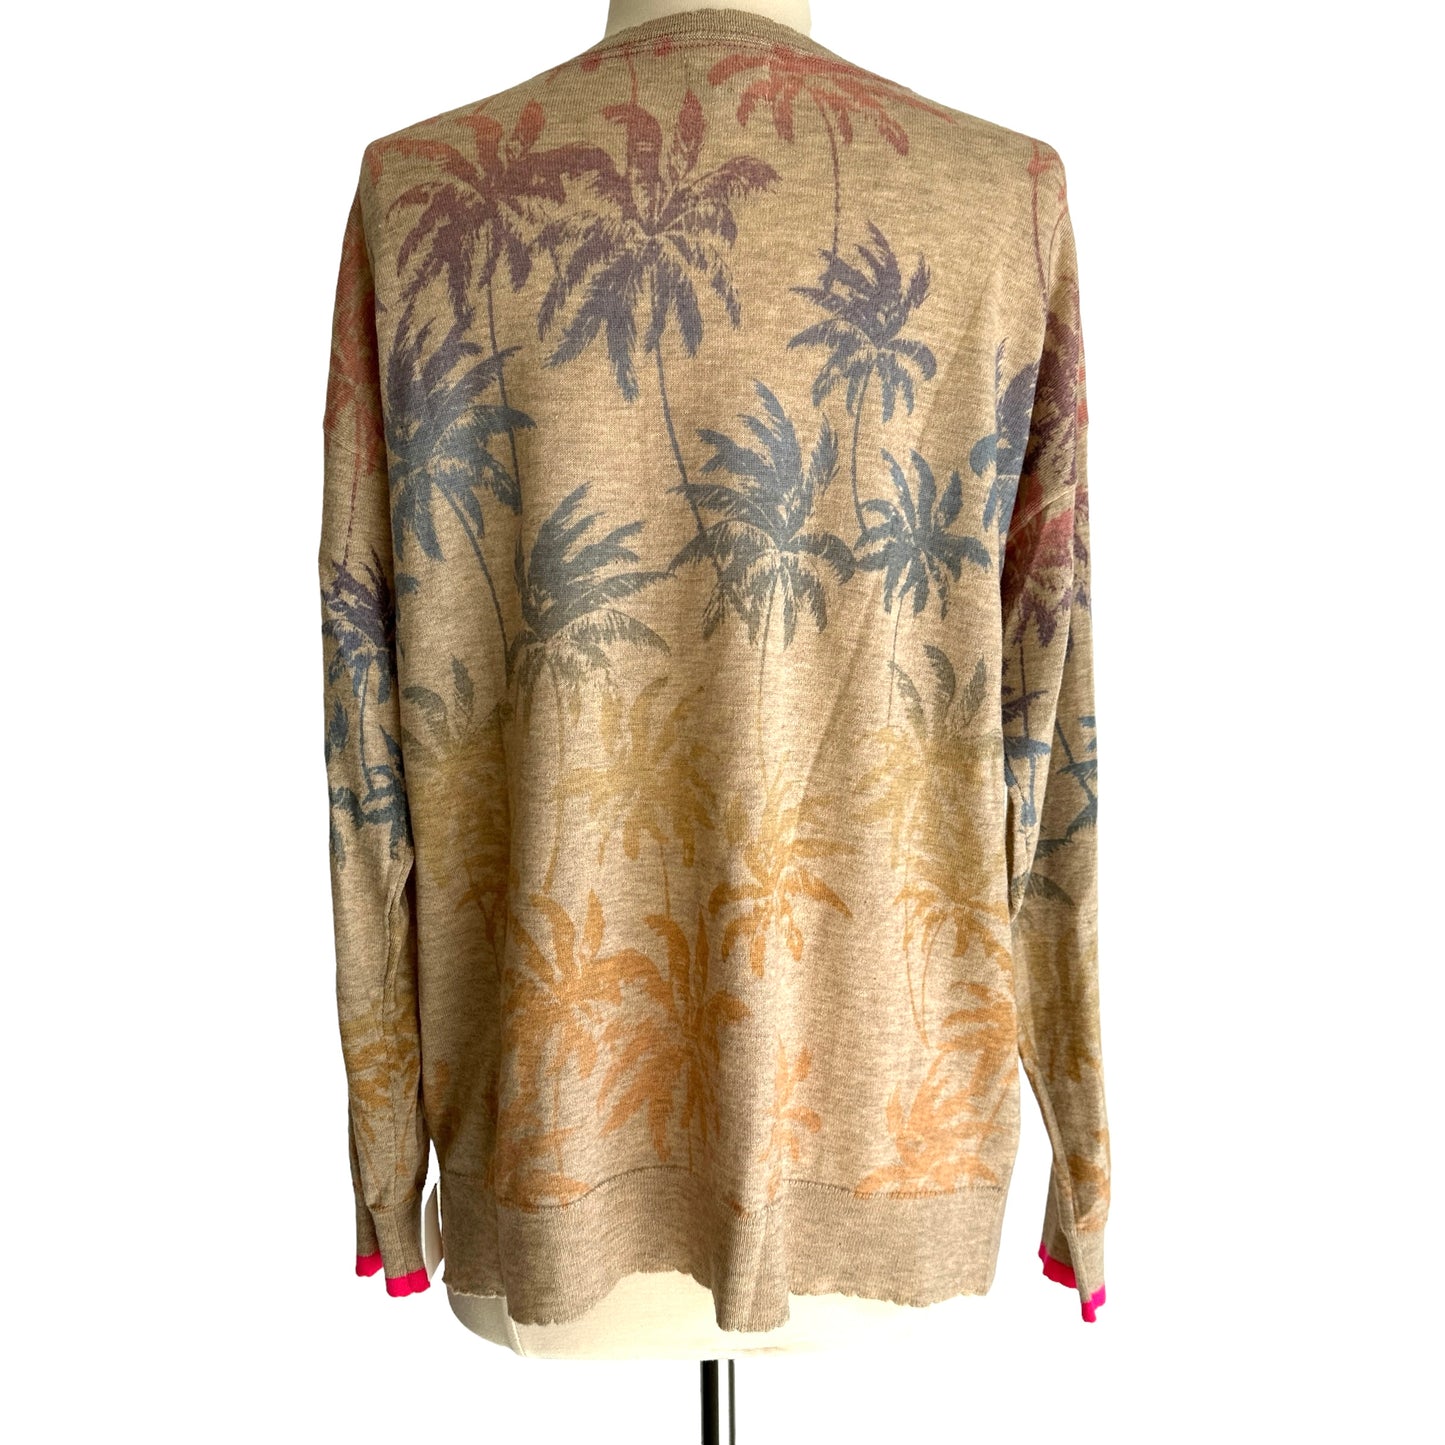 Palm Trees Sweater - S